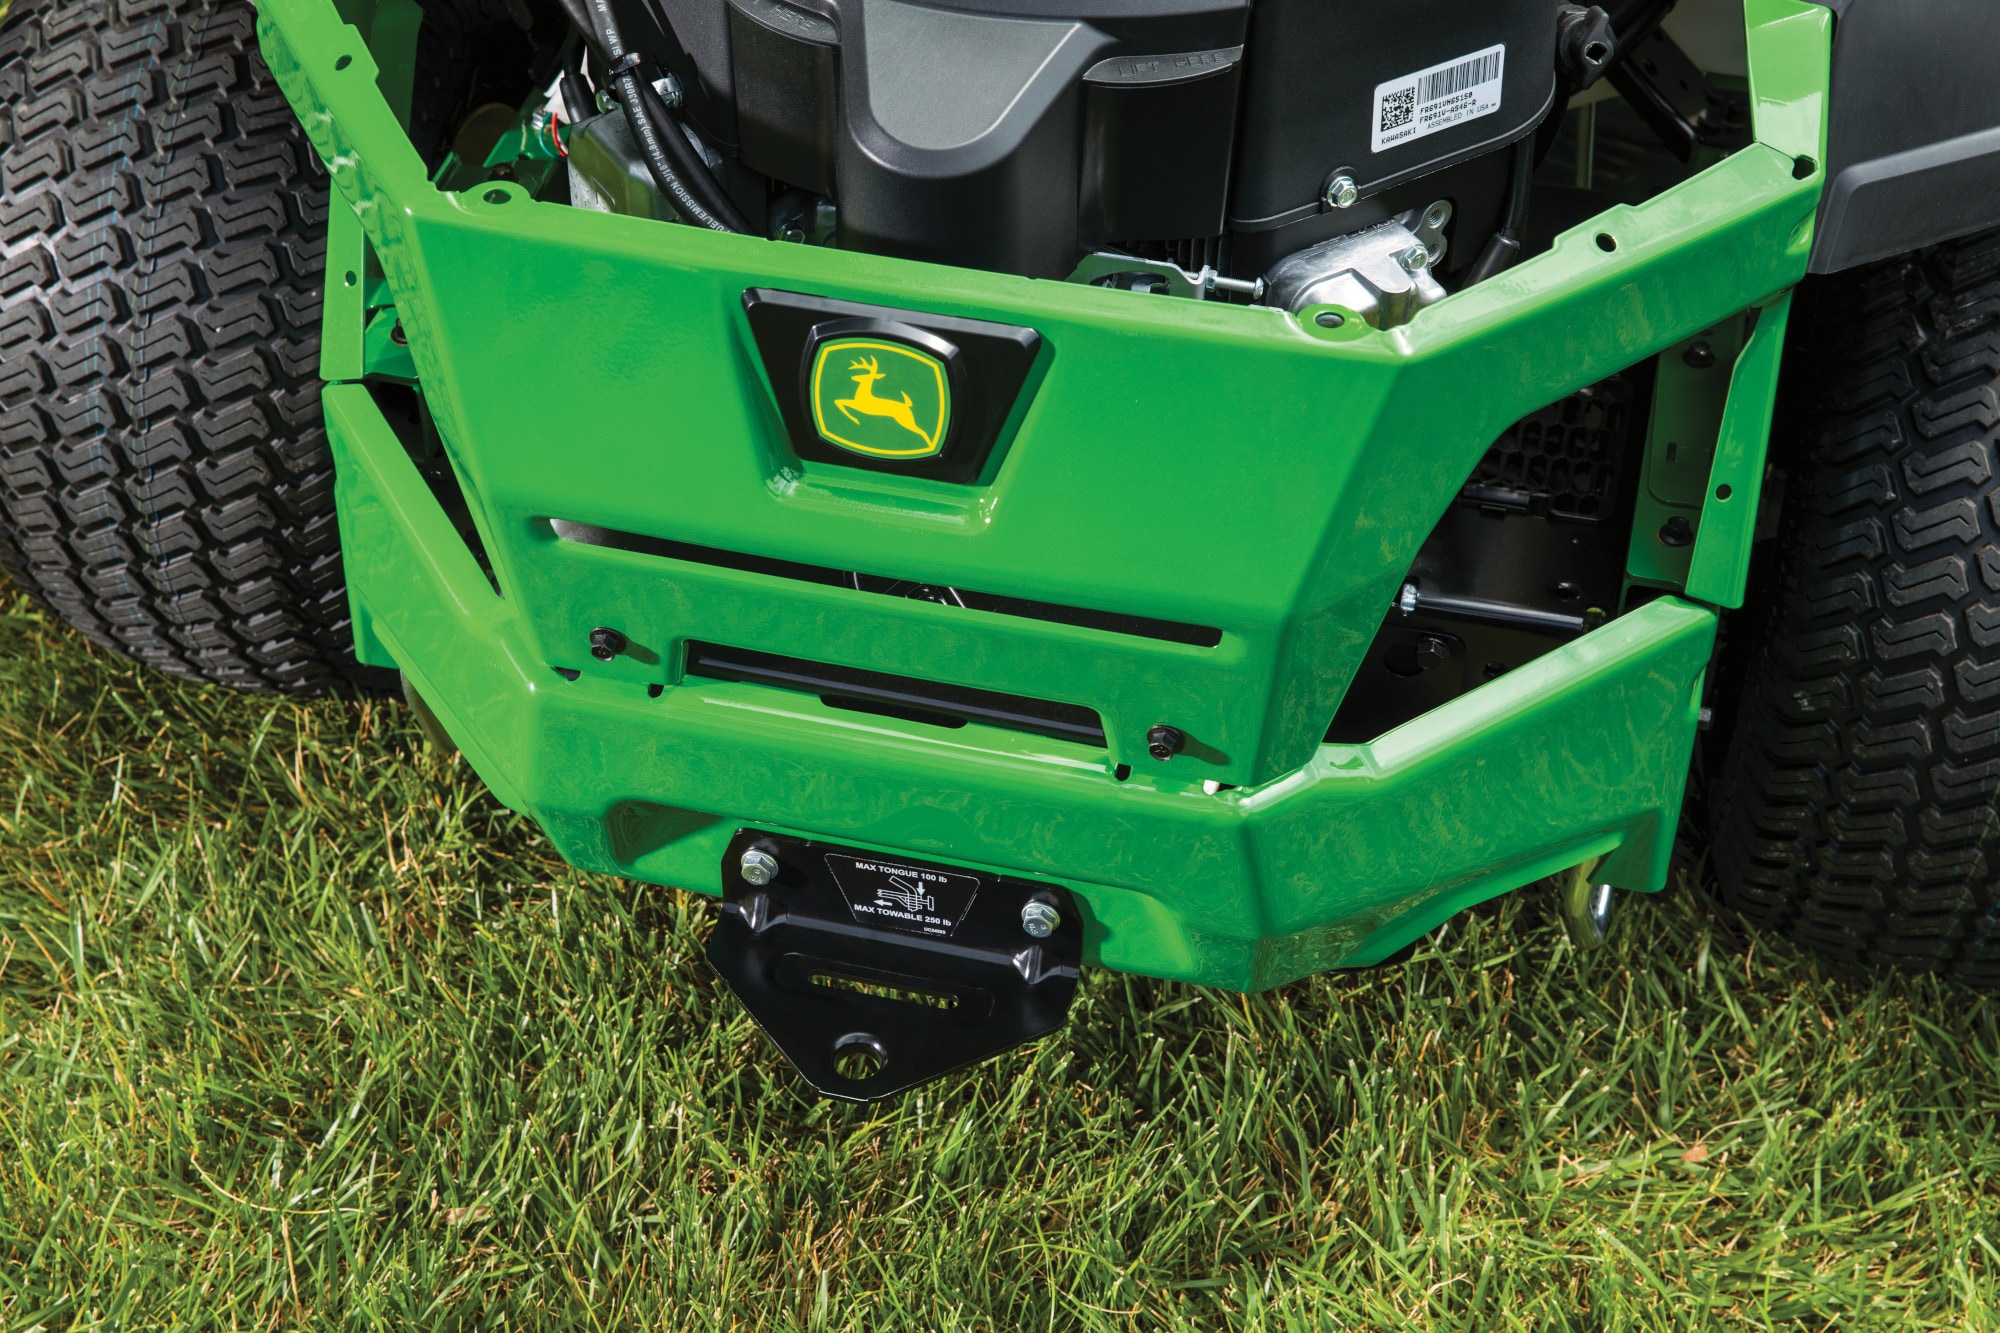 John Deere Riding Lawn Mower Accessories at Lowes.com